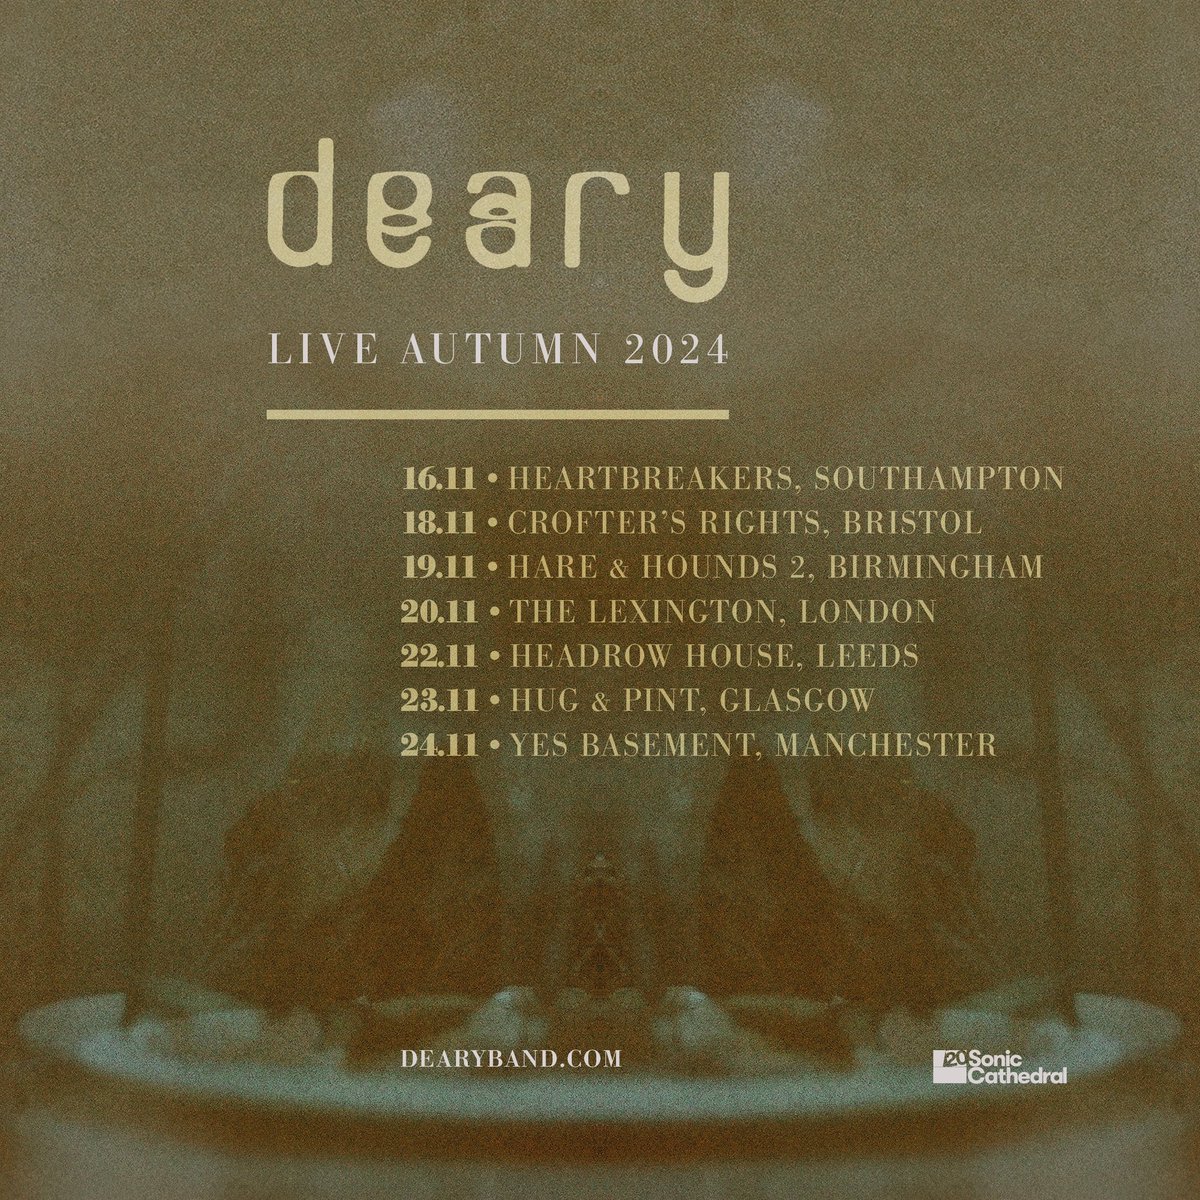 We’re delighted to announce our first ever headline UK tour in November, with our first visits to Southampton, Bristol, Birmingham, Manchester and Glasgow. Stopping off in Leeds again for good measure…